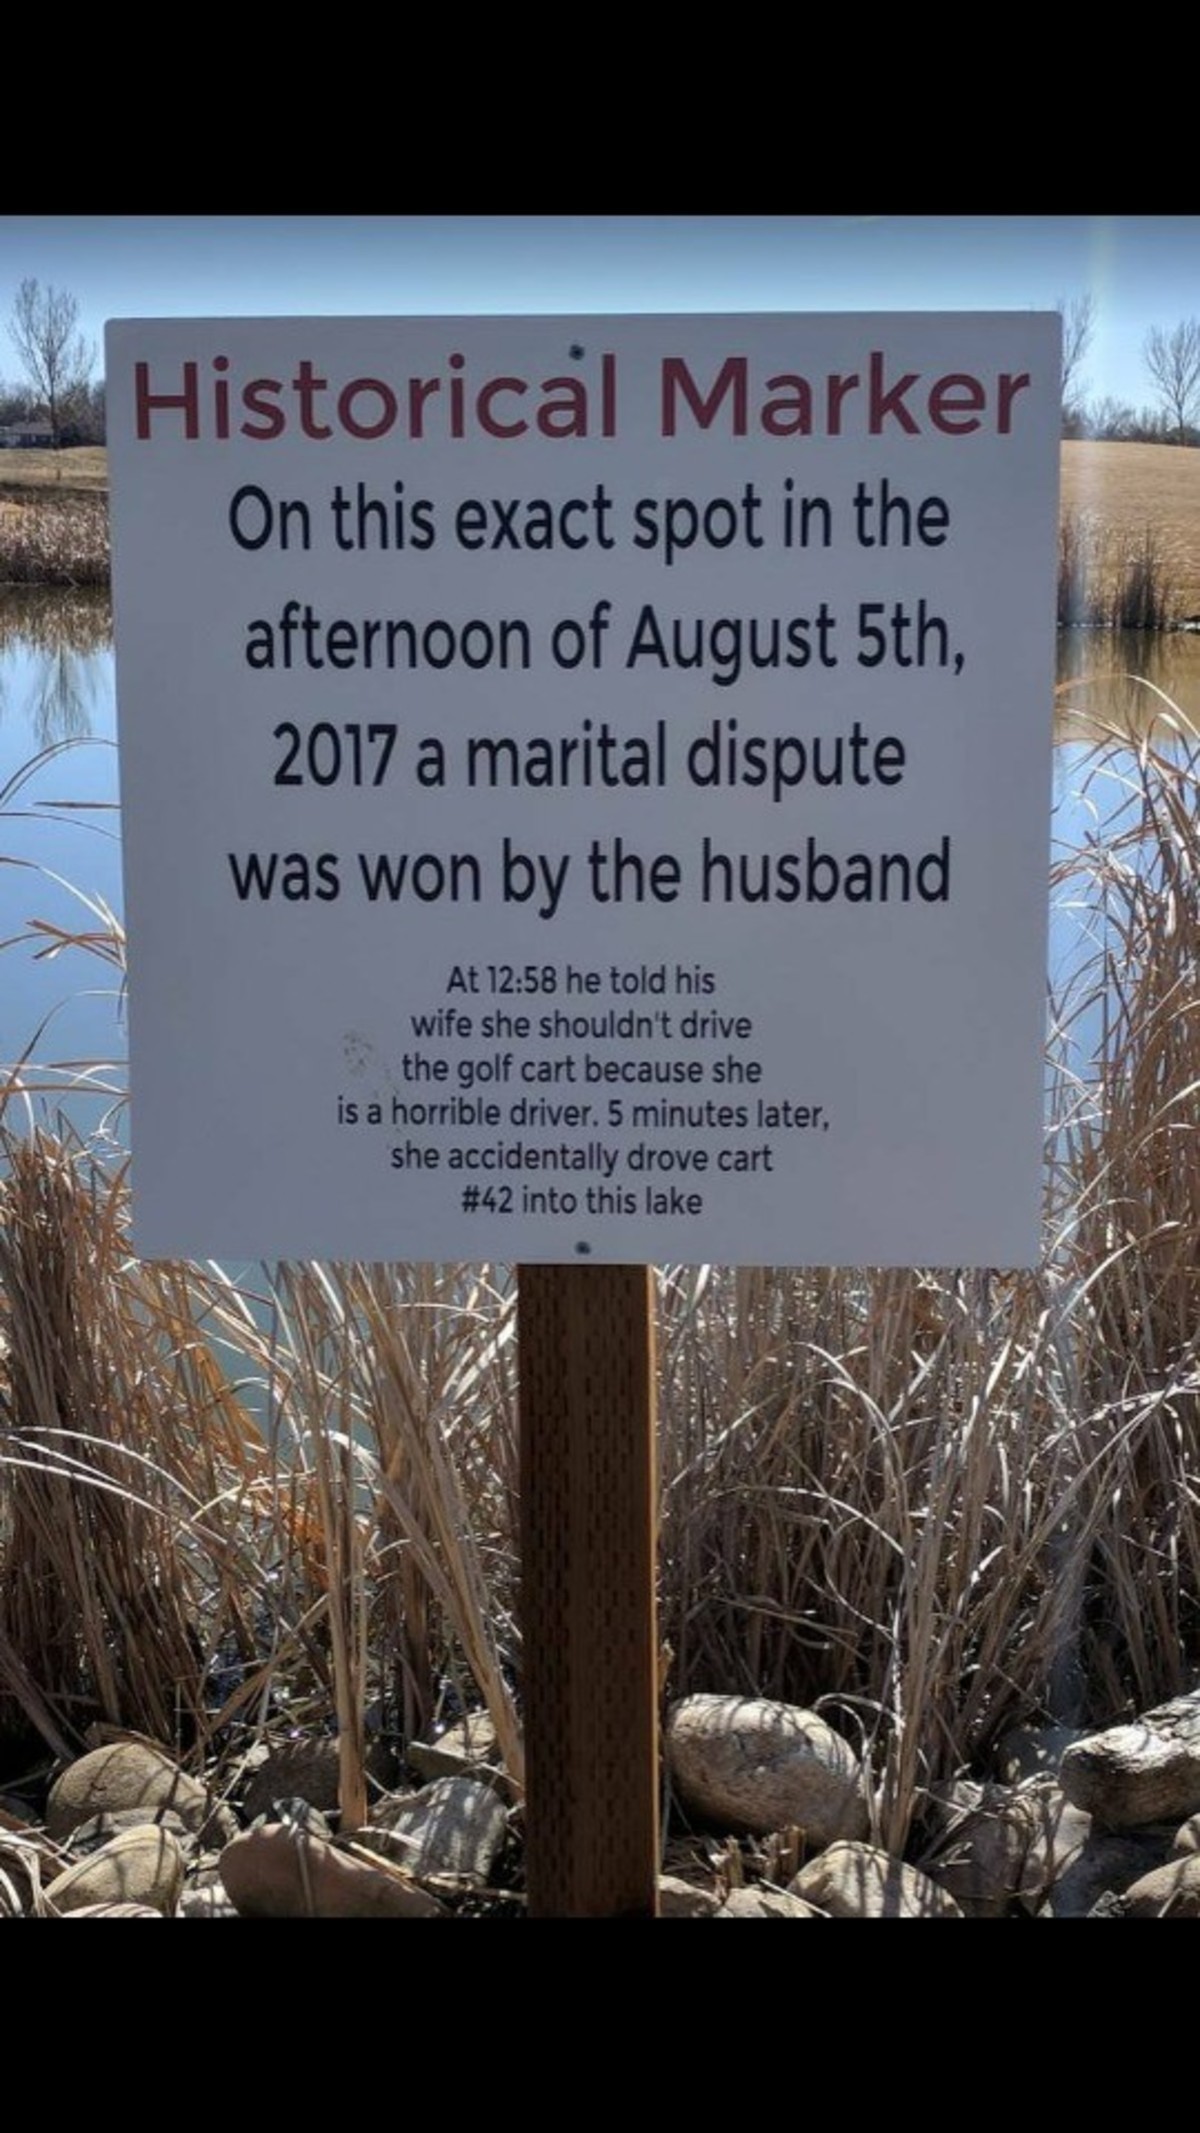 History. . Ill!'! Historical Marker, on this exact spot in the afternoon of August tth, 2017 l marital dispute was won 'r) the husband At 12: 58 he told his wif